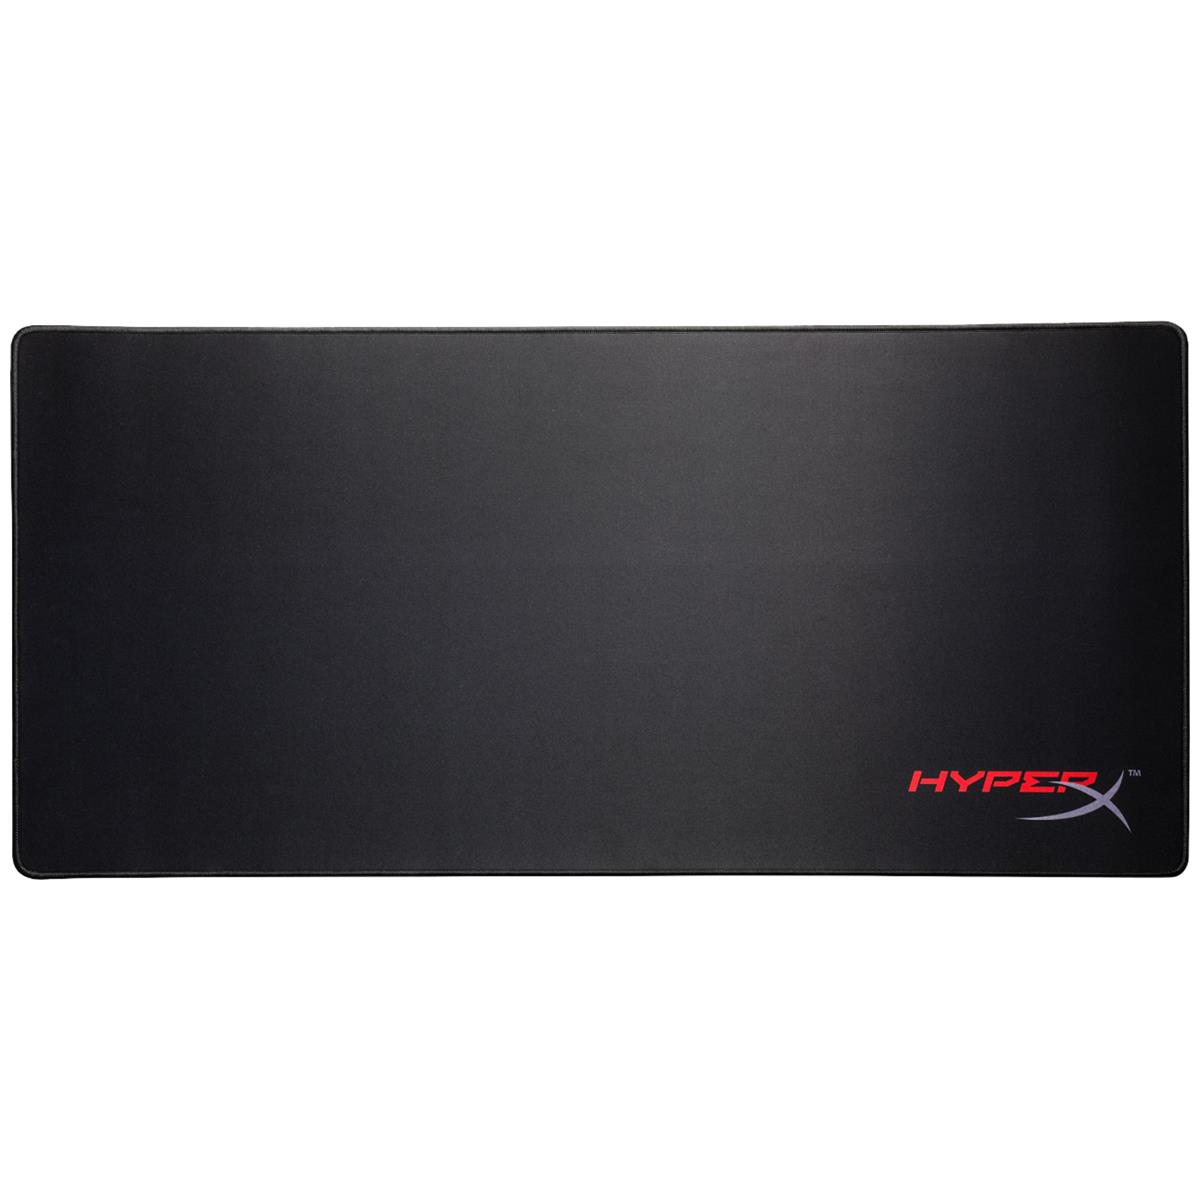 Image of HyperX FURY S Gaming Mouse Pad